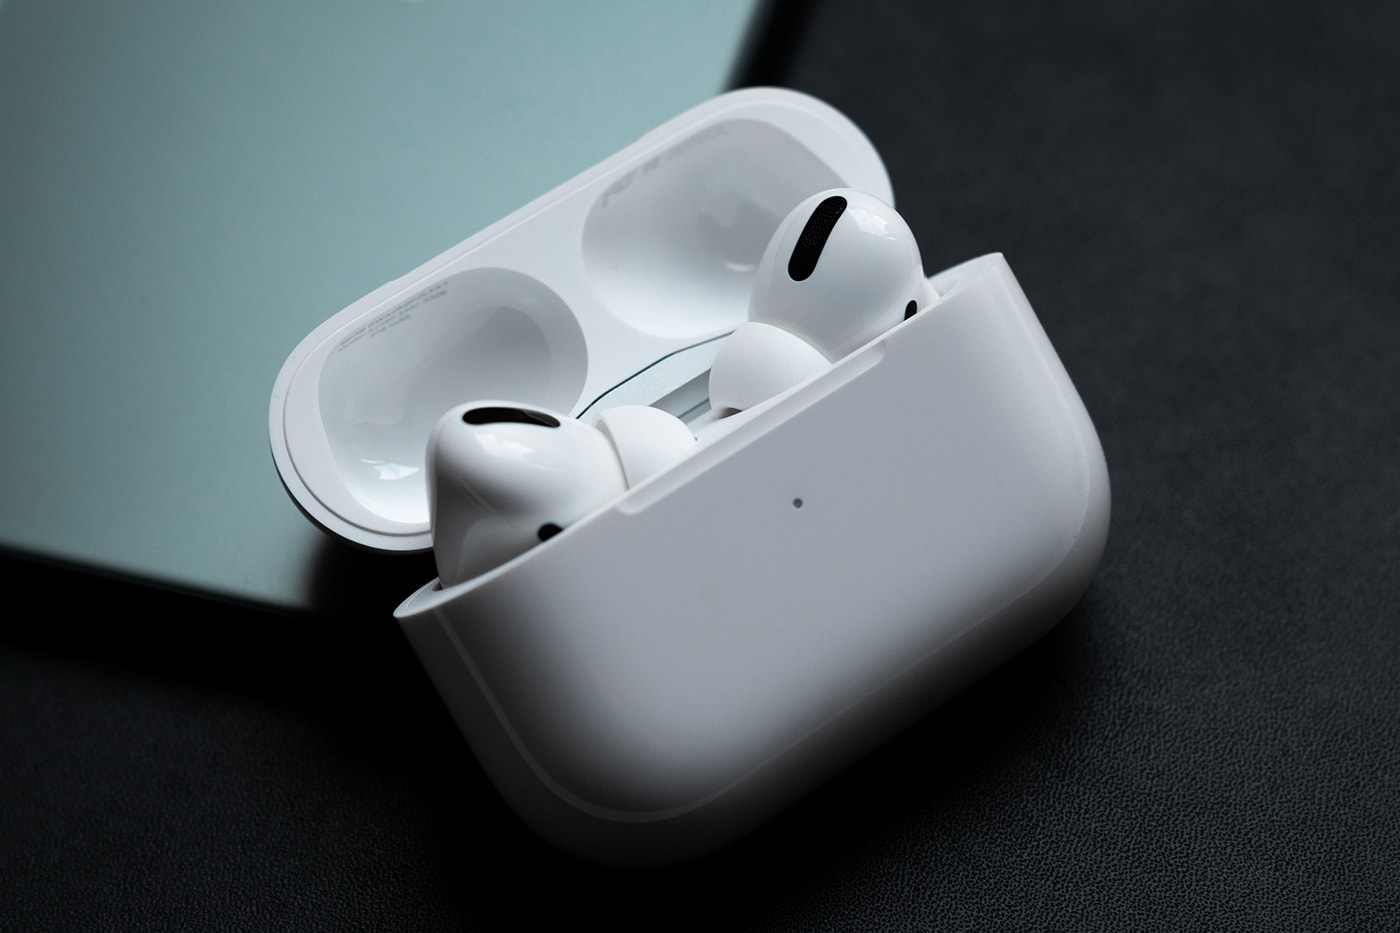 Apple AirPods Pro Closer Look Release info Date Buy on hands Review white color Active Noise Cancellation Adaptive EQ Transparency mode Charging Features 